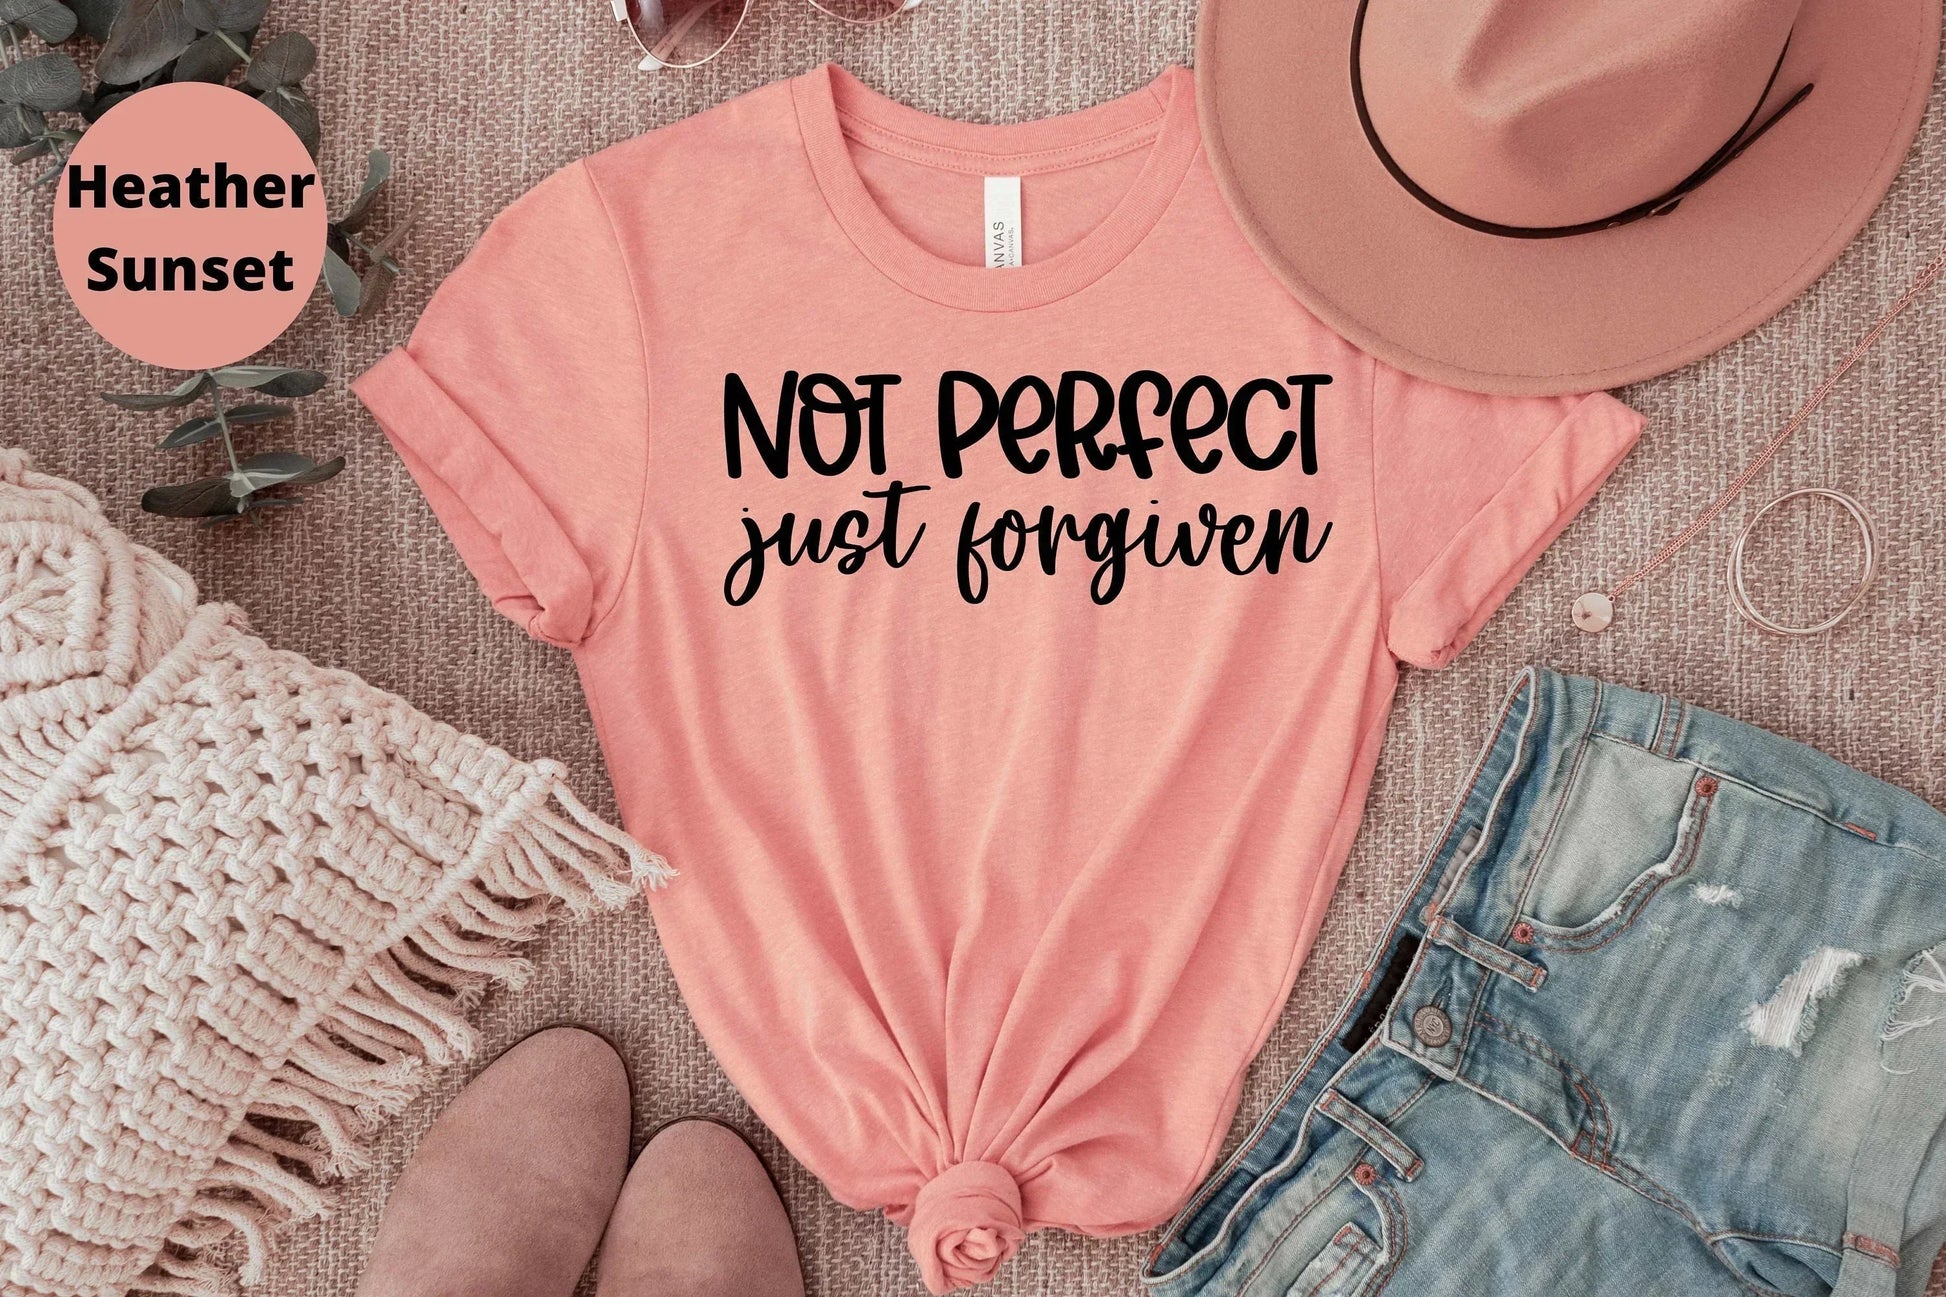 Not Perfect Just Forgiven, Christian Shirt about Jesus